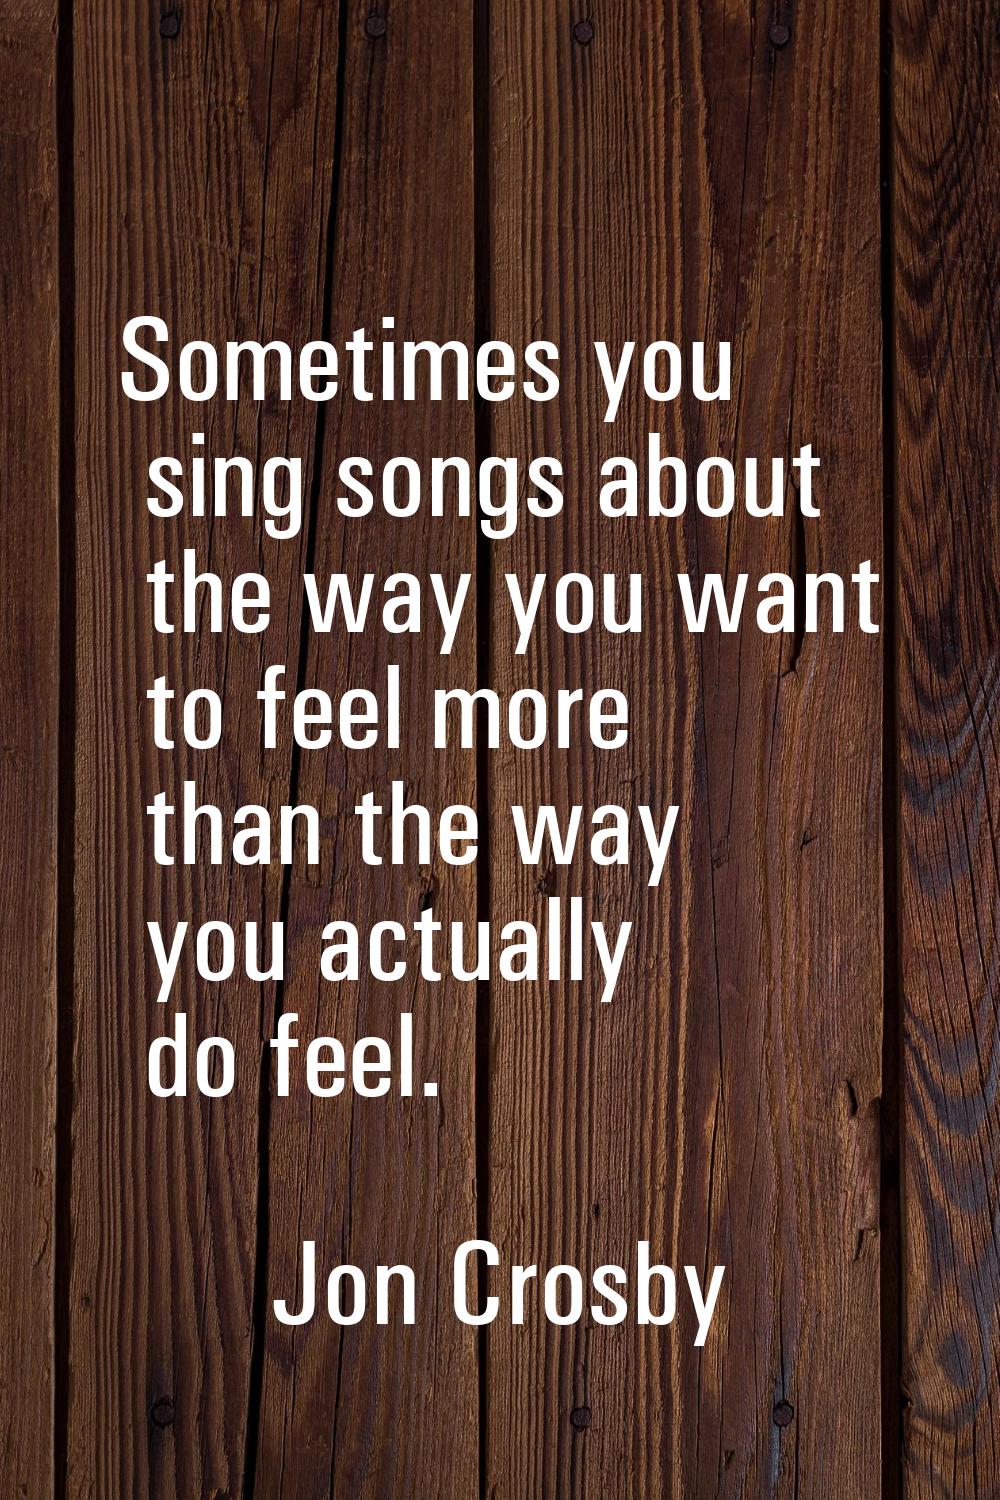 Sometimes you sing songs about the way you want to feel more than the way you actually do feel.